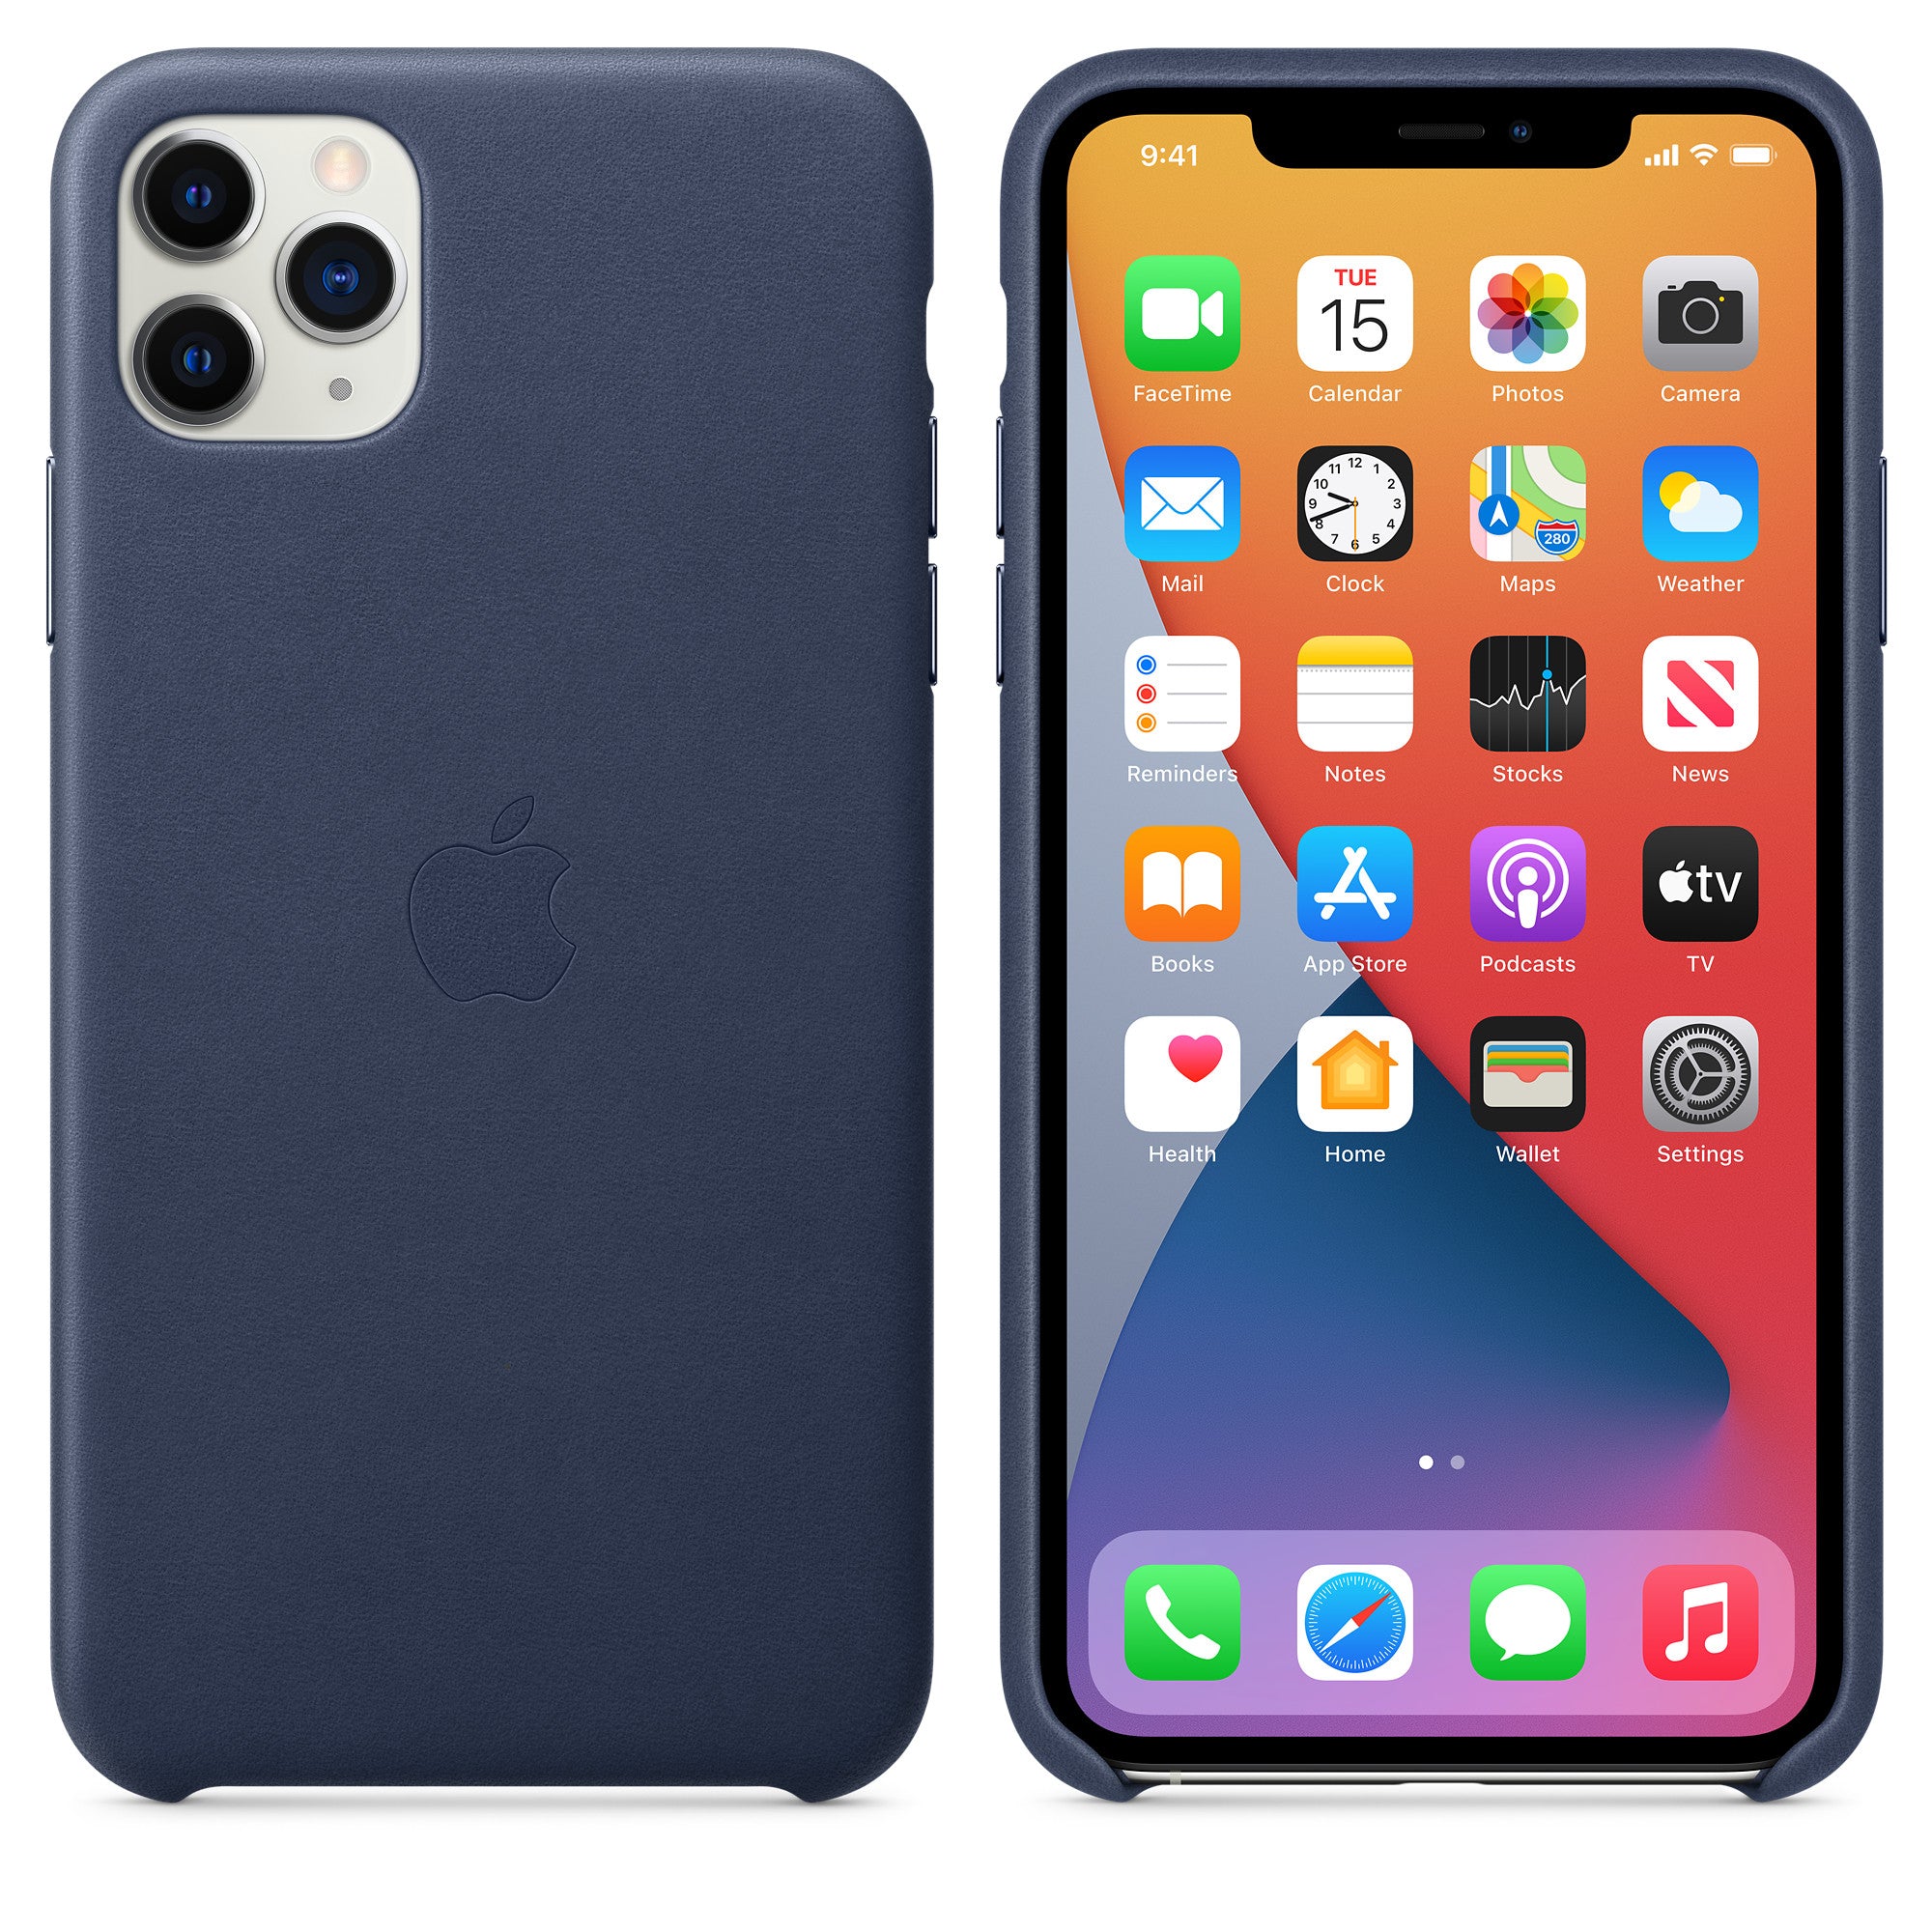 Apple iPhone 11 Pro Max Leather Case Midnight Blue Midnight Blue New - Sealed